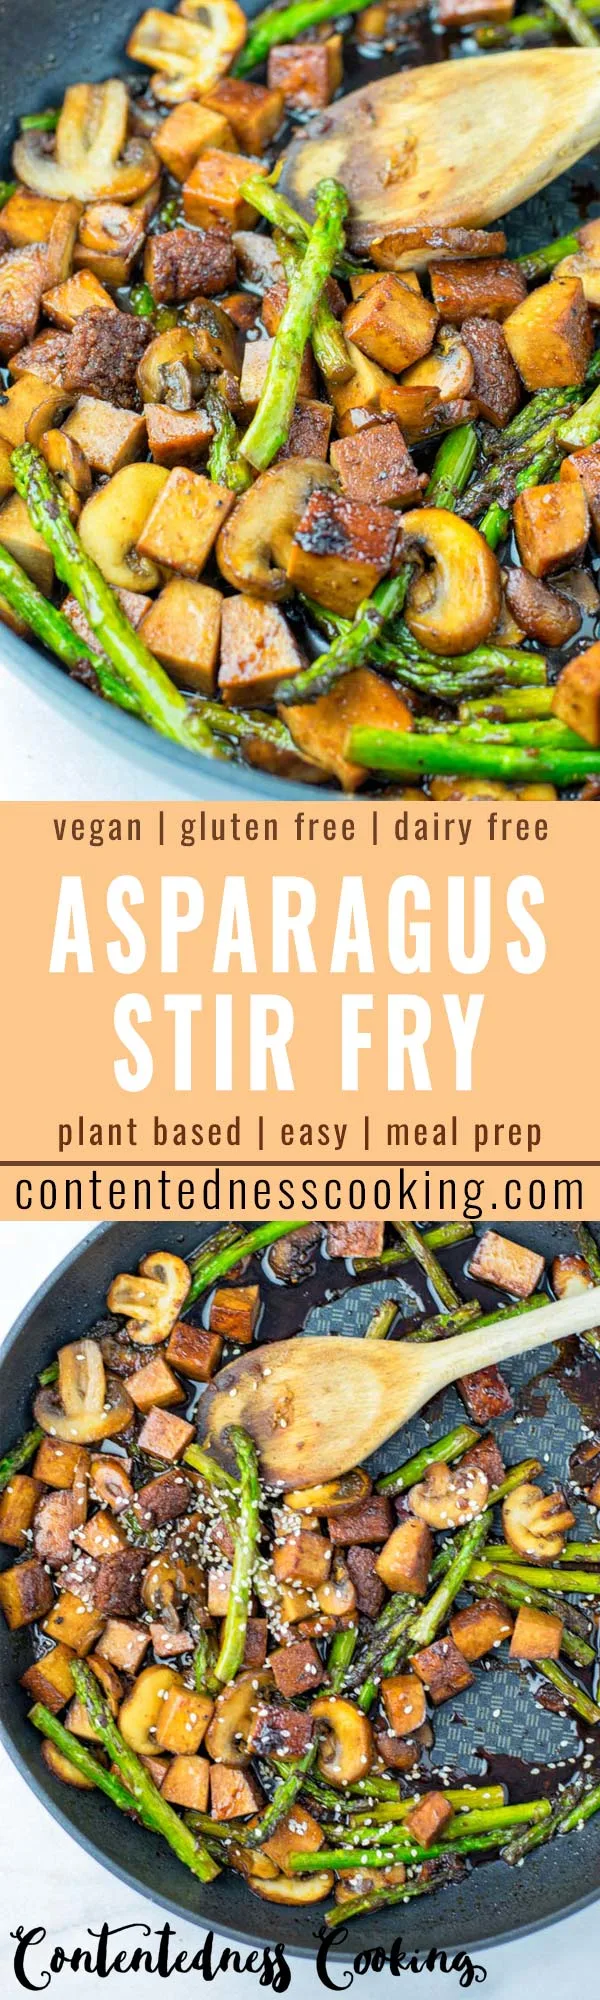 This vegan Asparagus Stir Fry is super easy. Looking to cook more veggies for your families? This healthy lunch or dinner is made with tofu, a soy sauce, and extra mushrooms. Ideal for meal prep, it reheats perfectly as work lunch. 